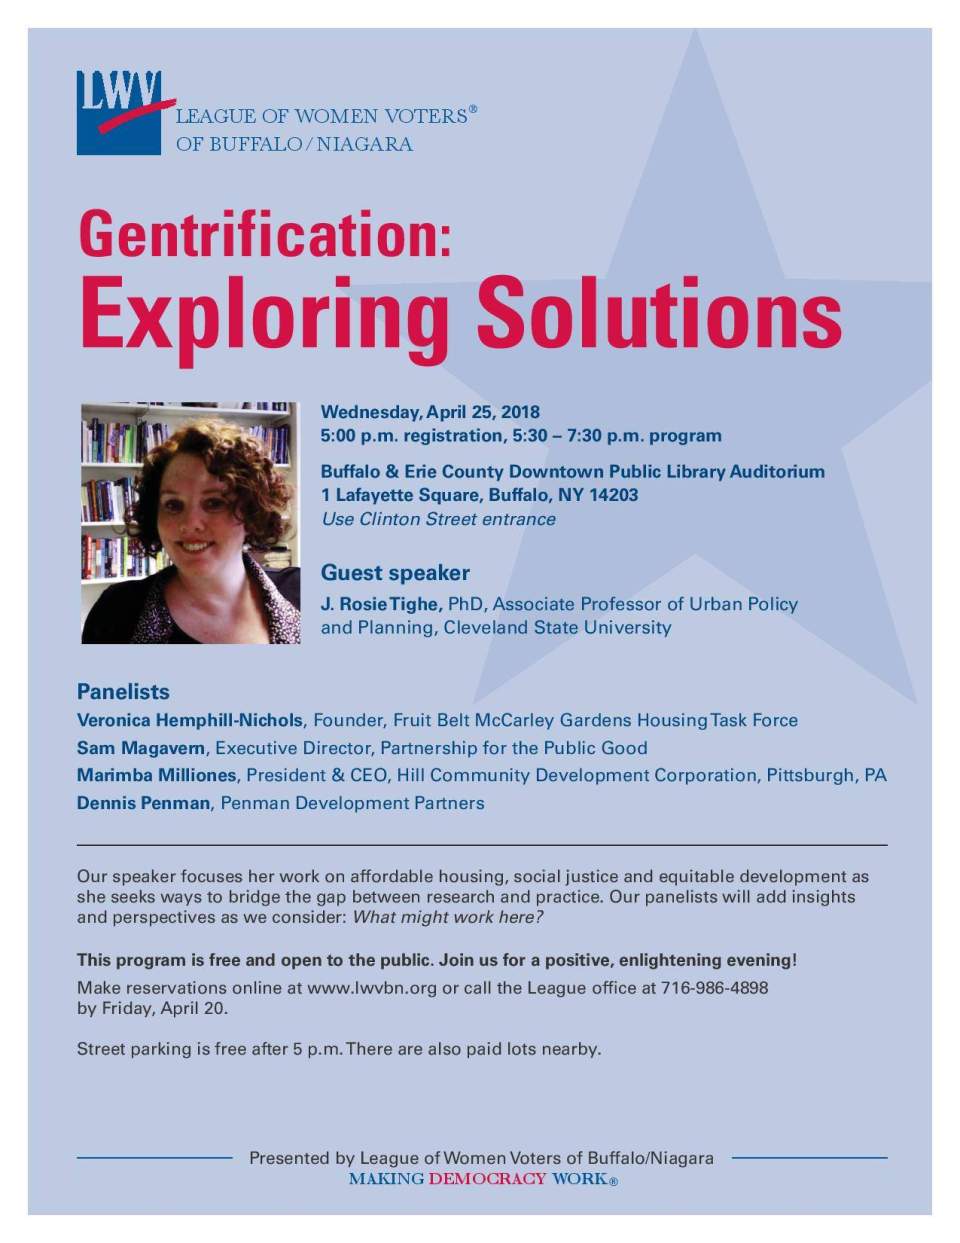 Speaker and Panelist Discussion on Exploring Solutions to Gentrification